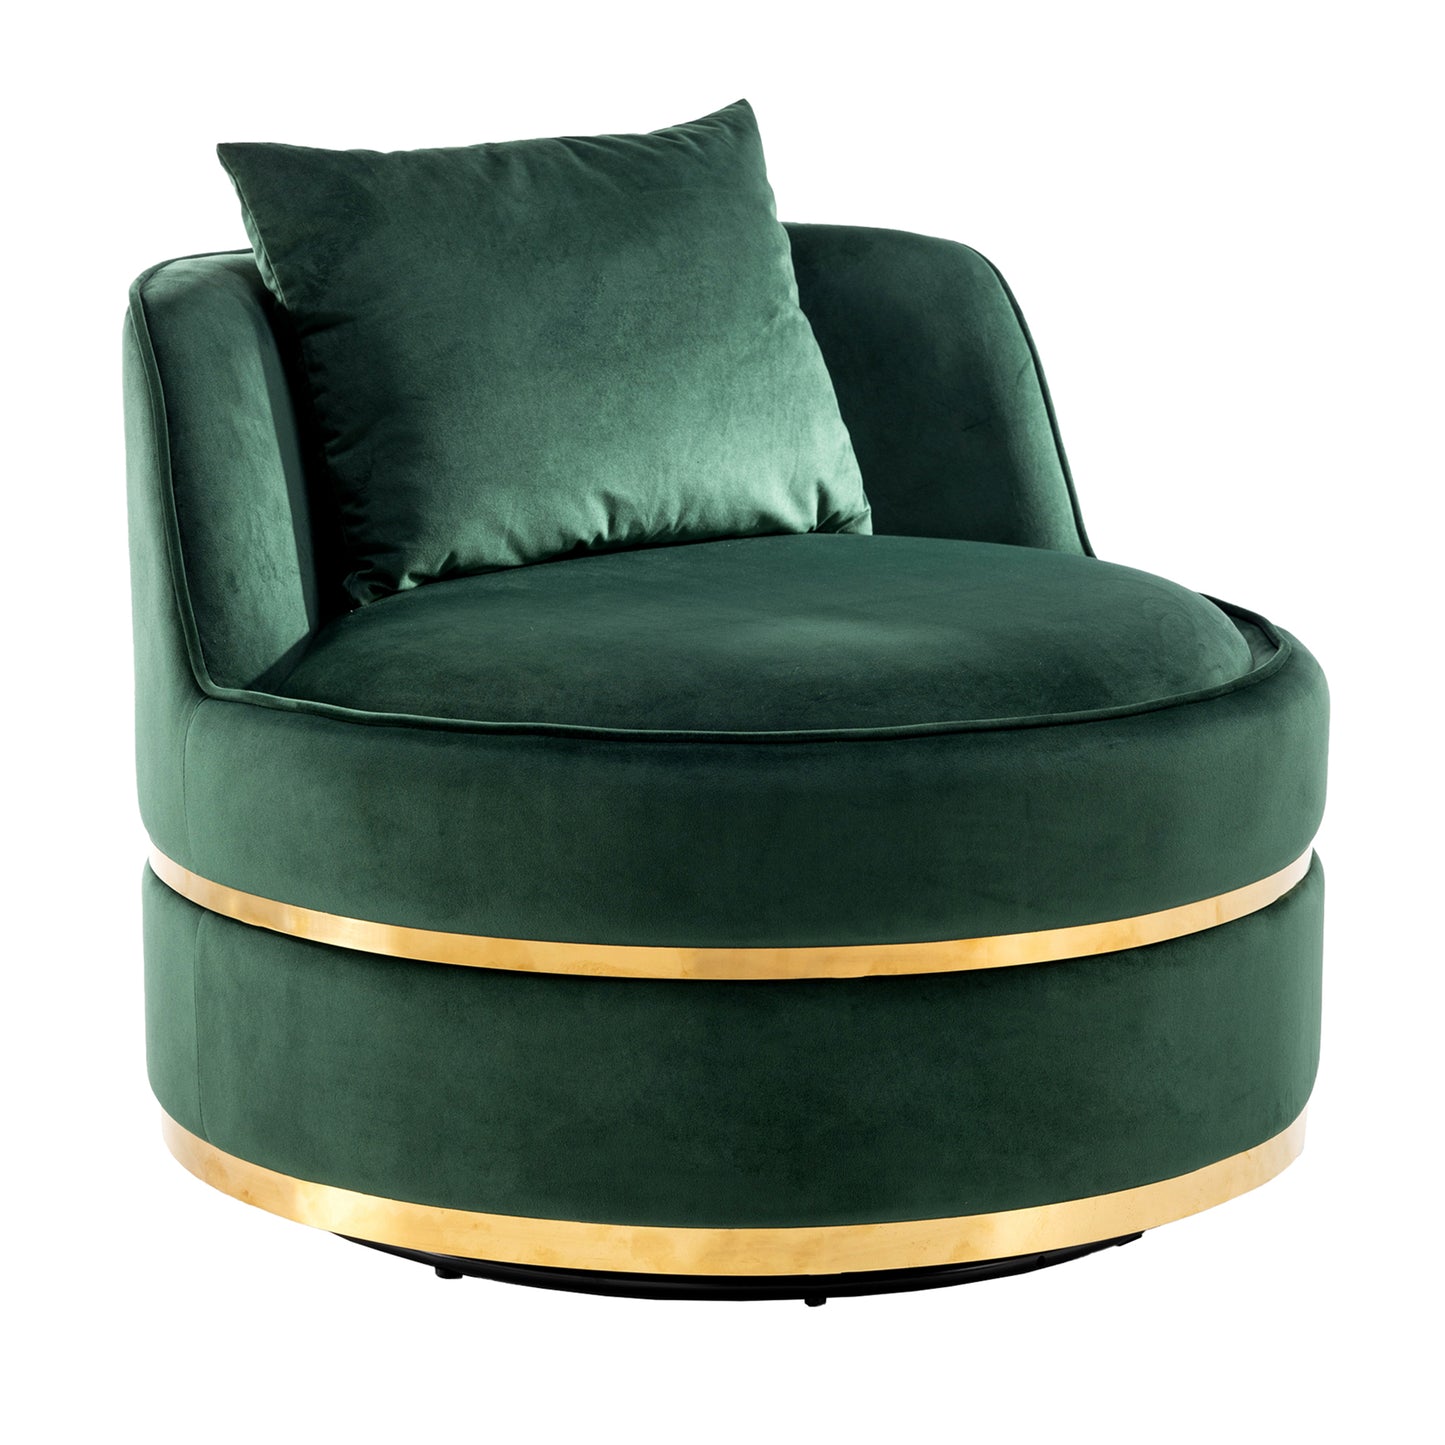 360 Degree Swivel Velvet Accent Chair, Barrel Chair Over-Sized Soft Chair with Seat Cushion, Green